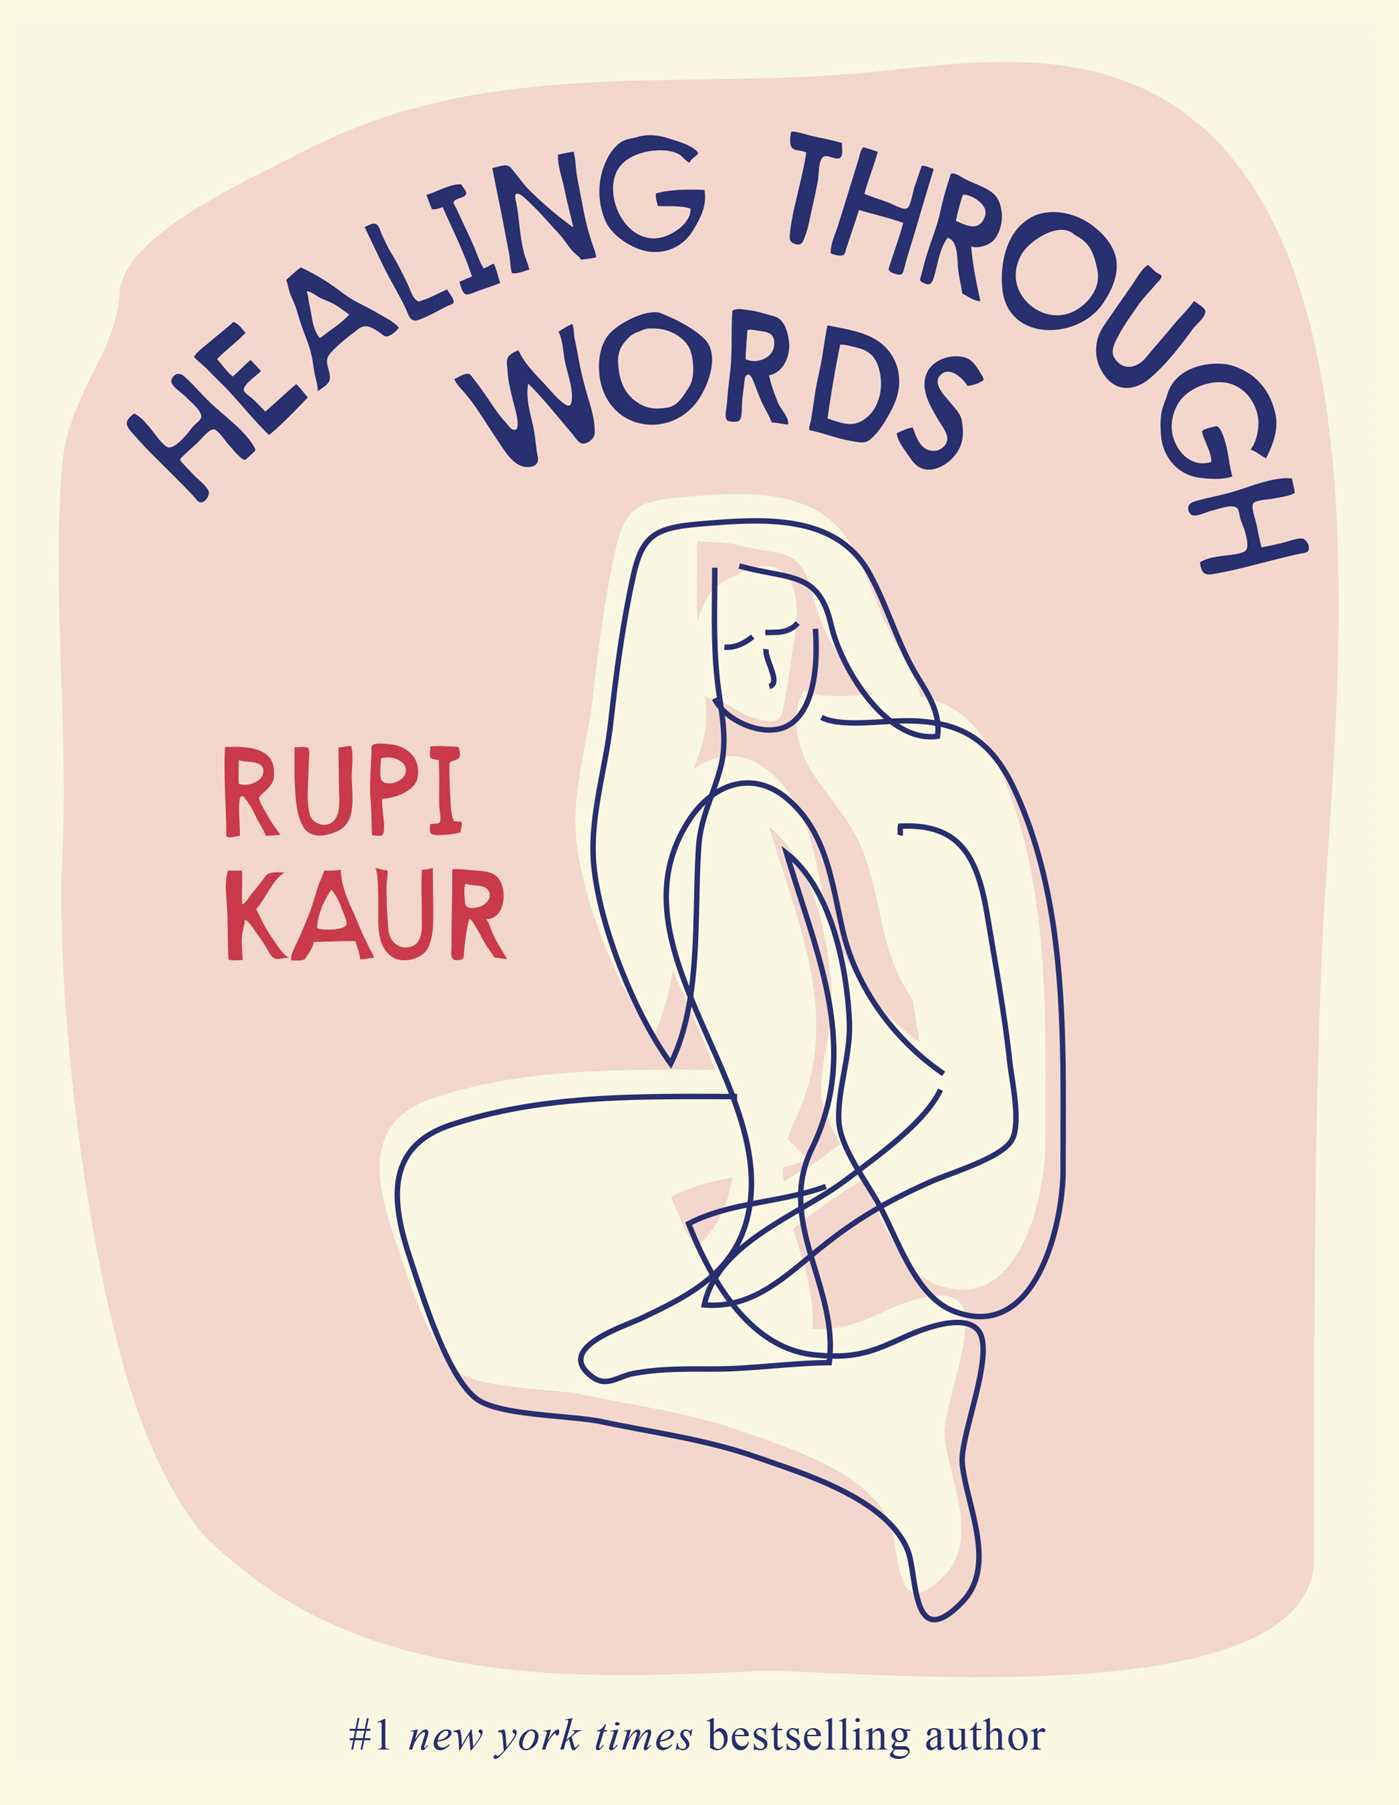 Post: Healing Through Words by Rupi KaurReview